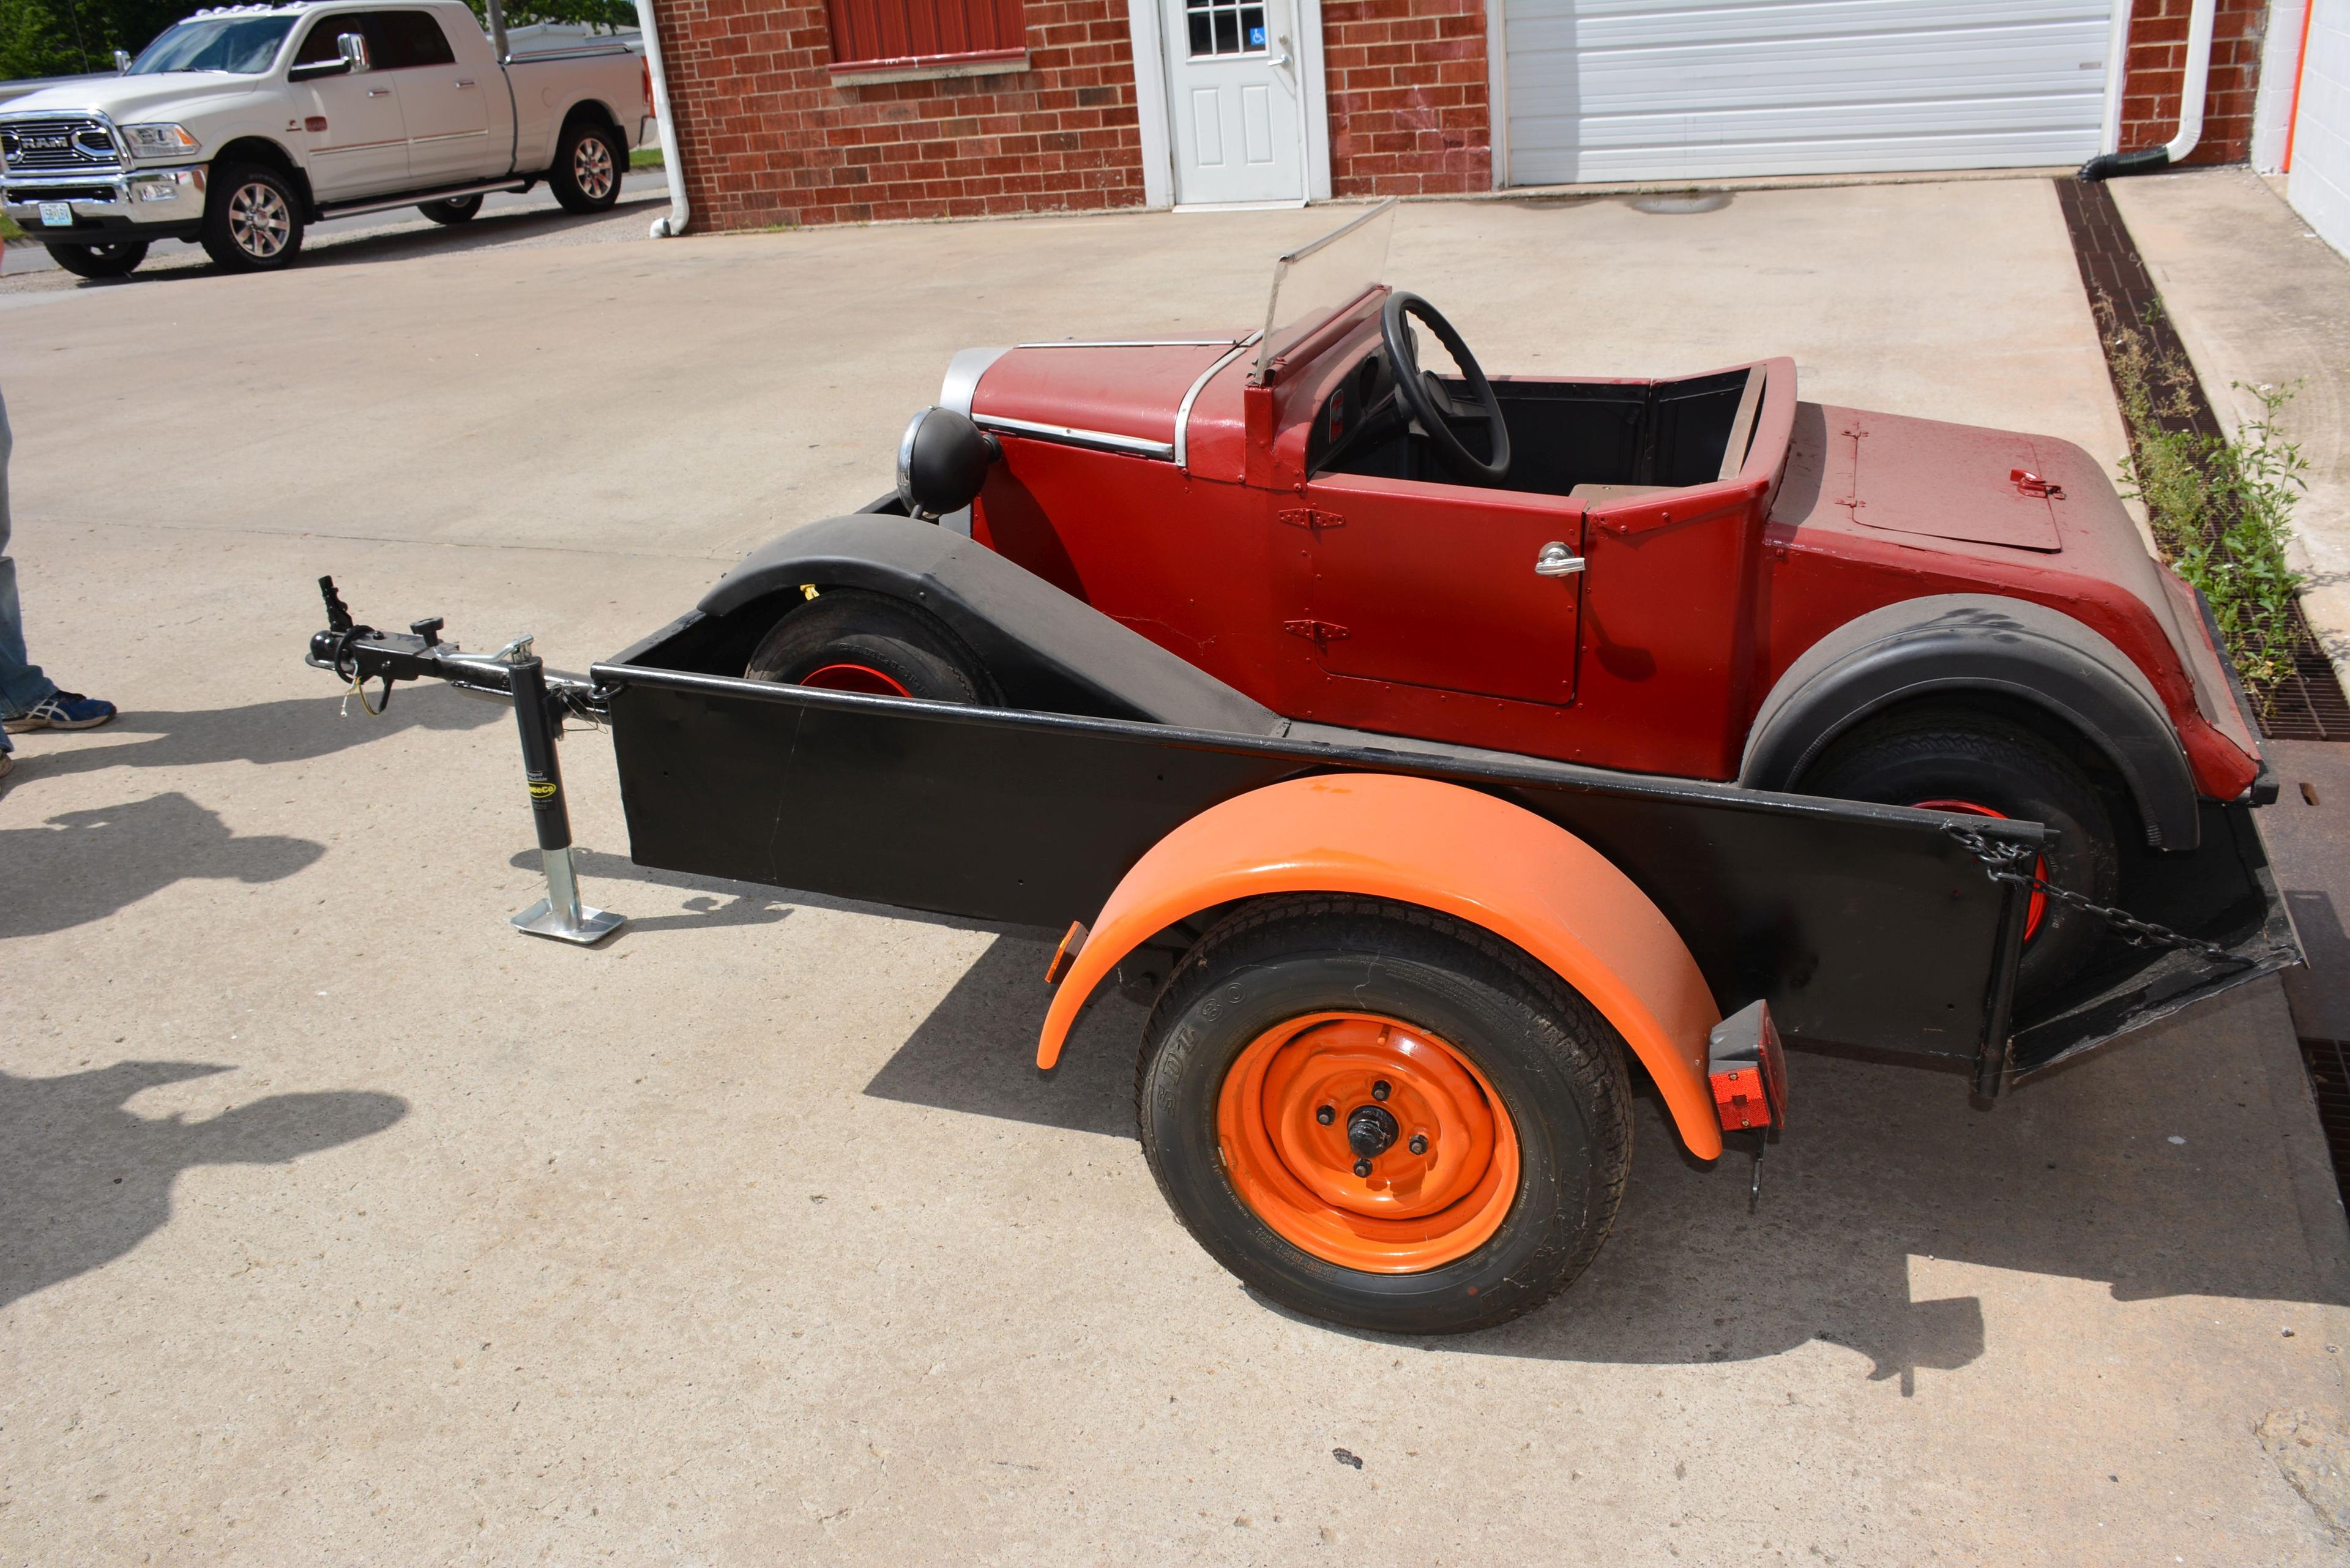 Homemade Trailer, 4ft X 6ft W/ Drop Down Tailgate, Used For Kiddie Car In L